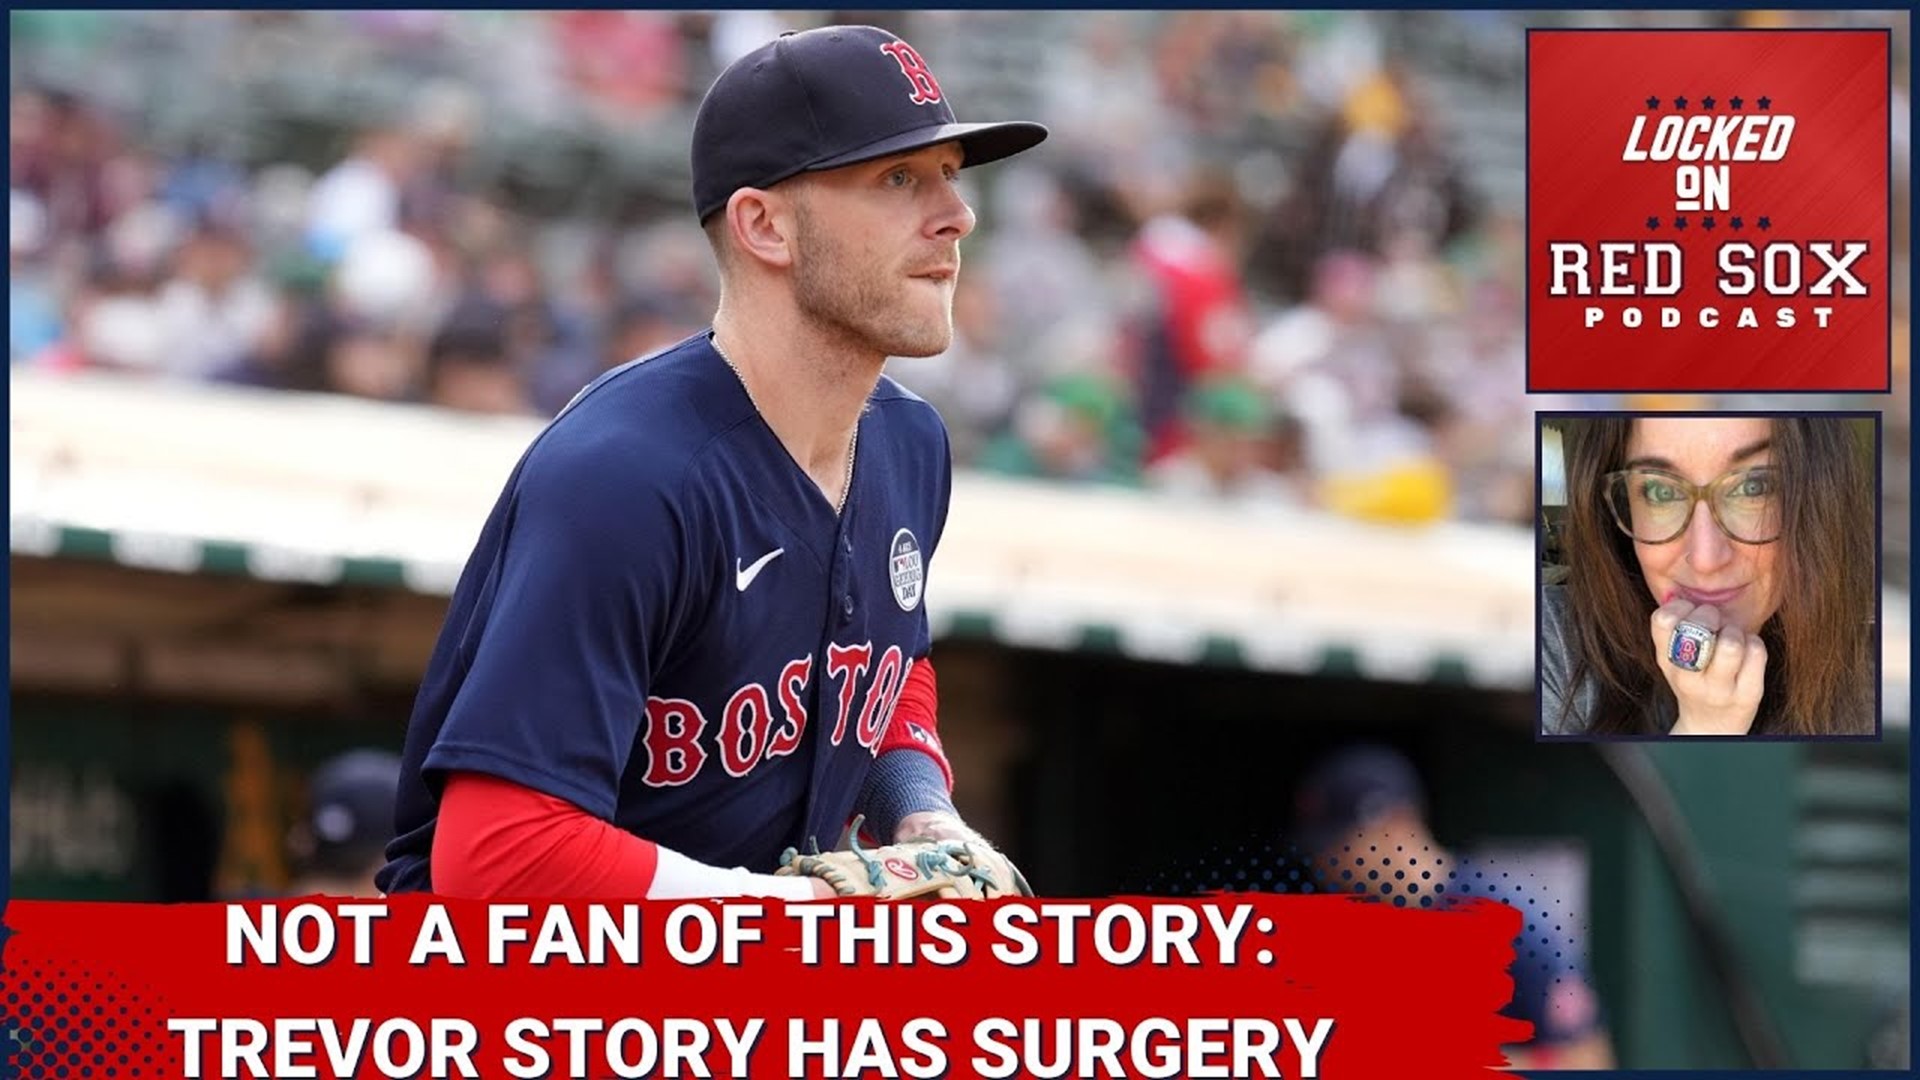 The offseason got a lot worse for the Boston Red Sox on Tuesday when they announced Trevor Story underwent surgery on his throwing elbow.